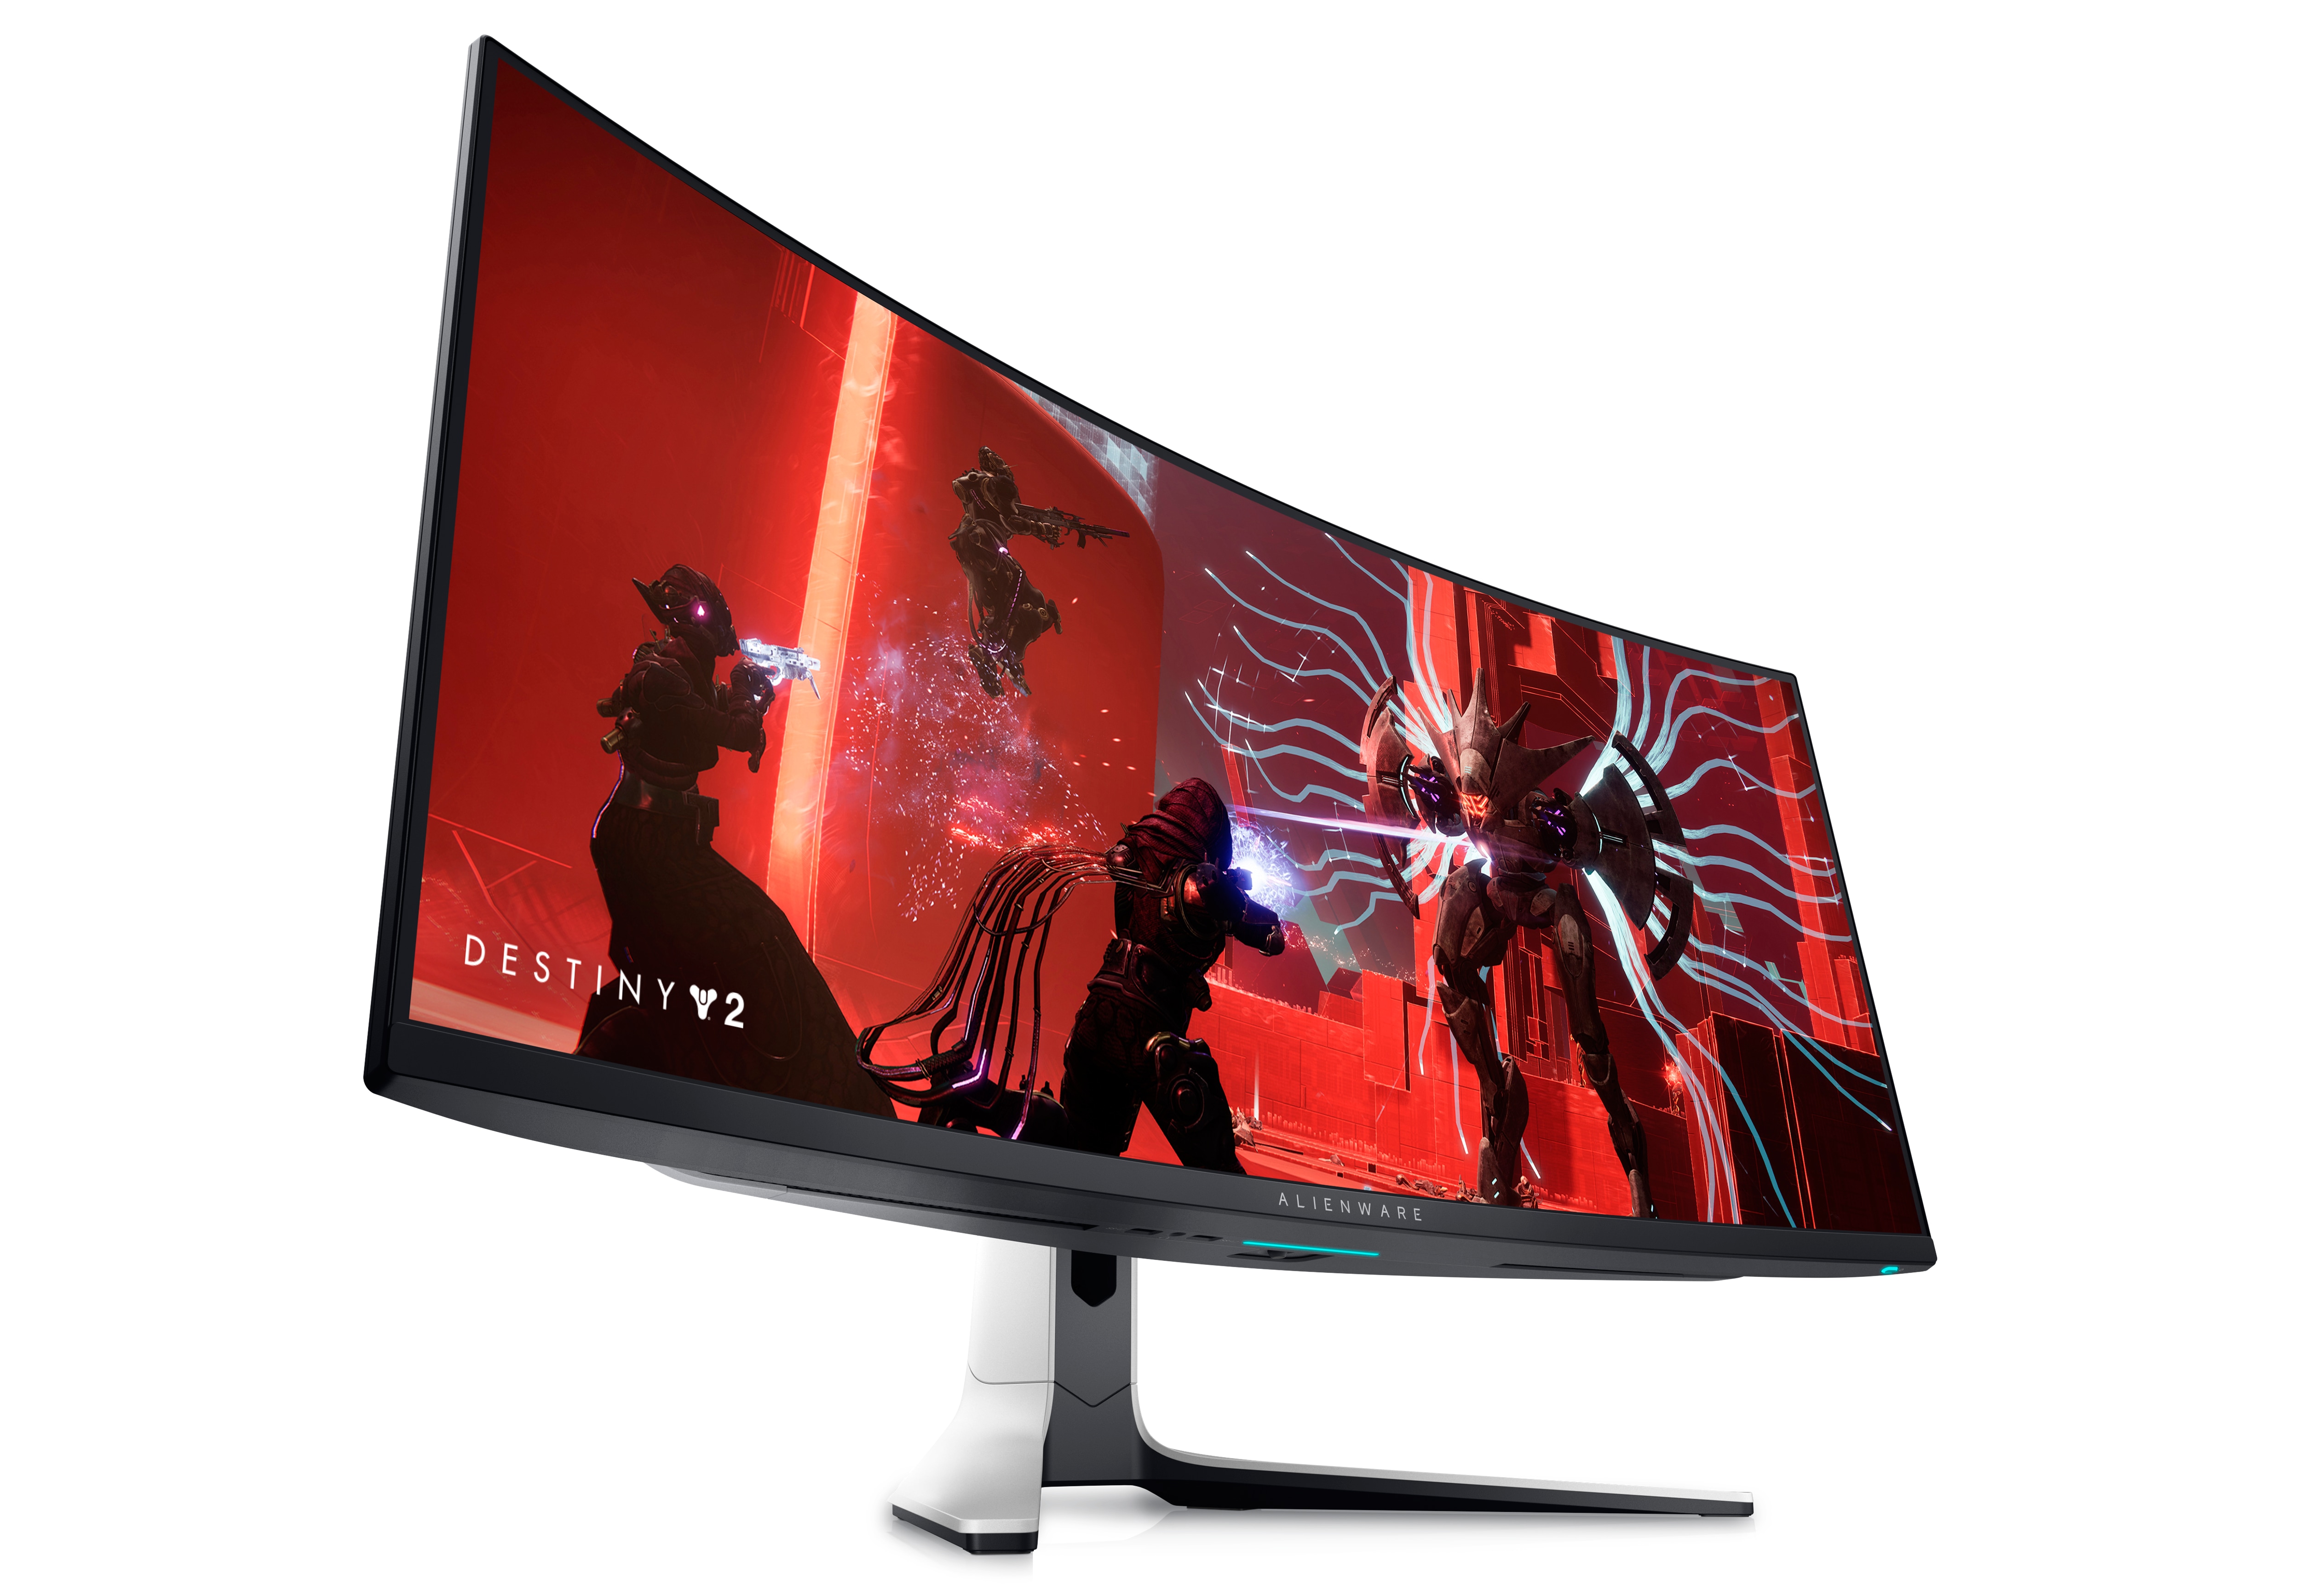 Picture of a Dell Alienware AW3423DW Monitor with a Destiny 2 game image on the screen